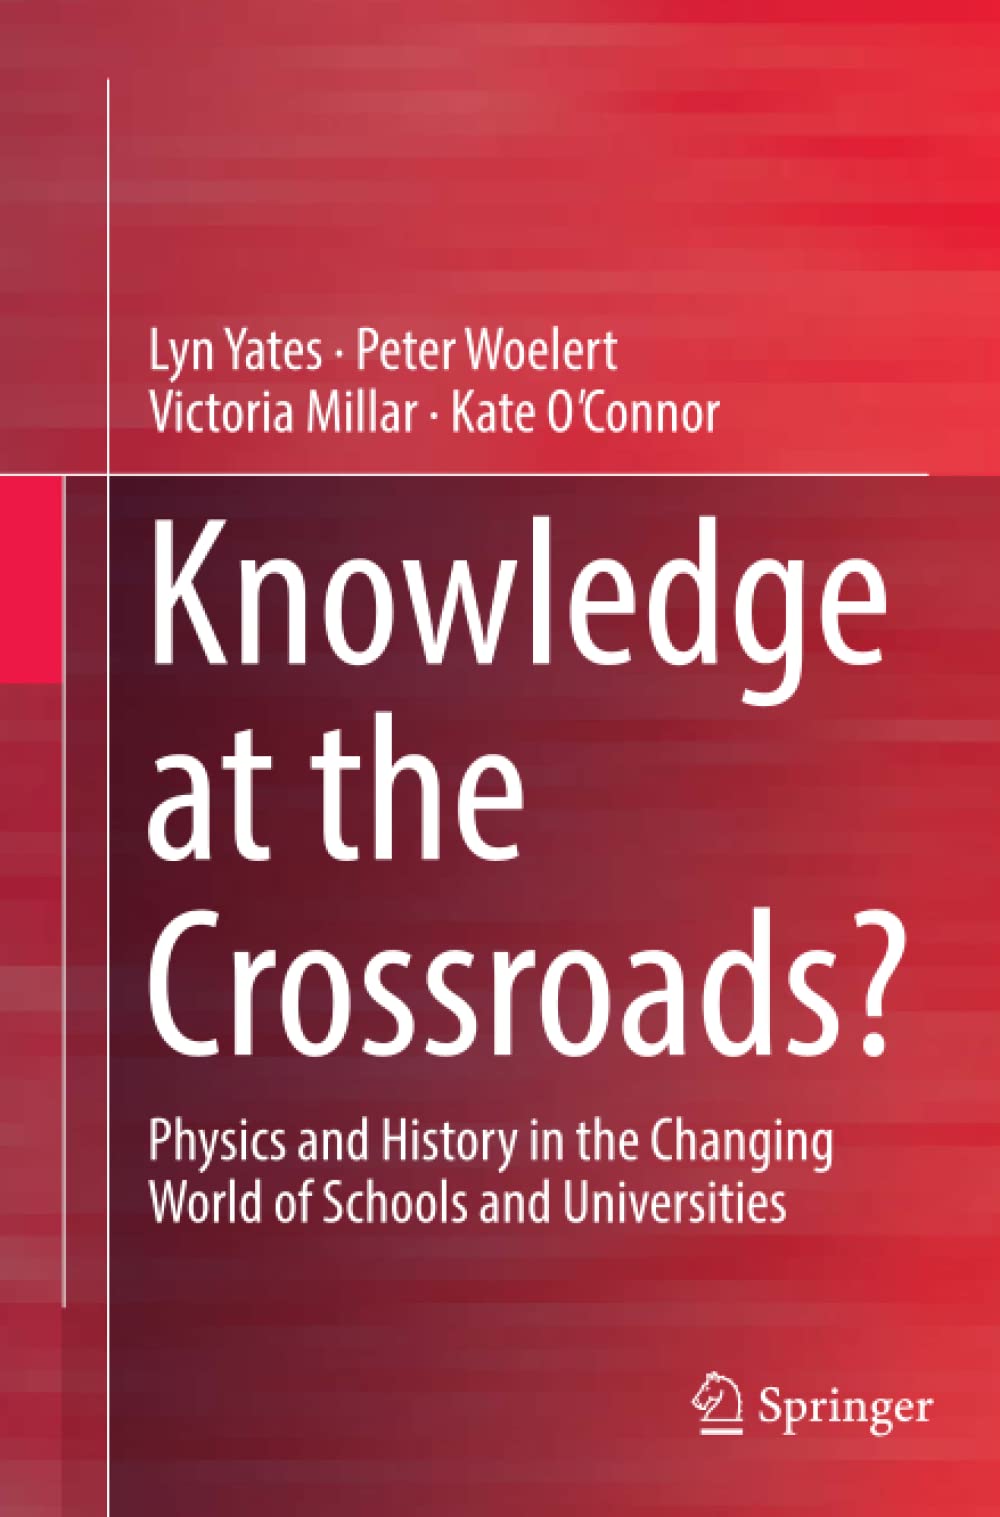 Knowledge at the Crossroads?: Physics and History in the Changing World of Schools and Universities